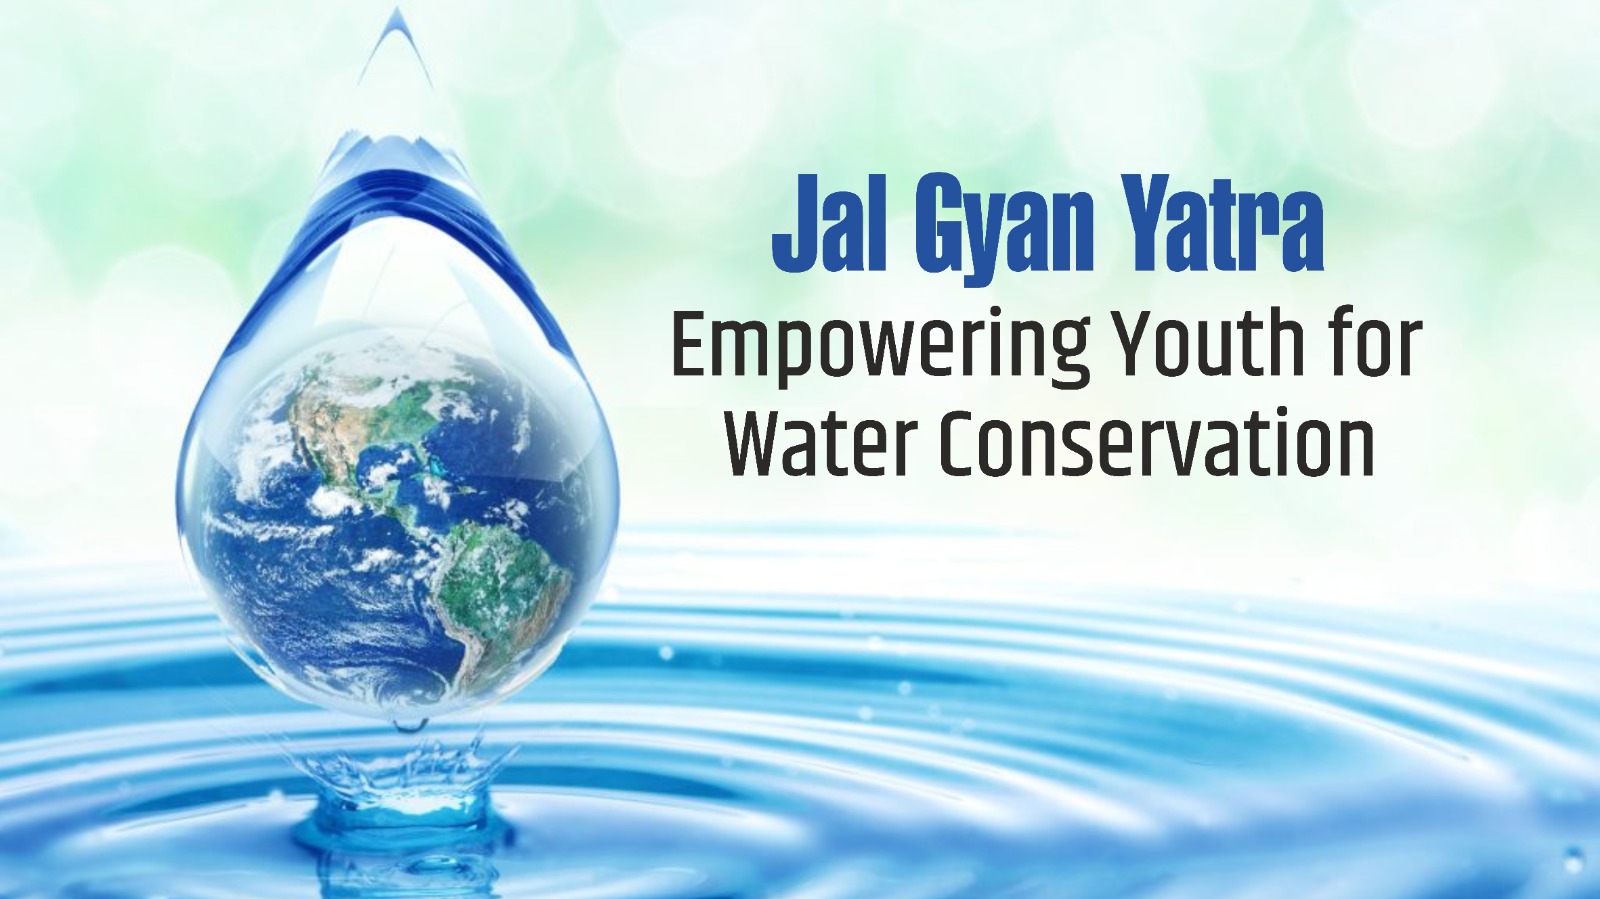 Jal Gyan Yatra Empowering Youth for Water Conservation